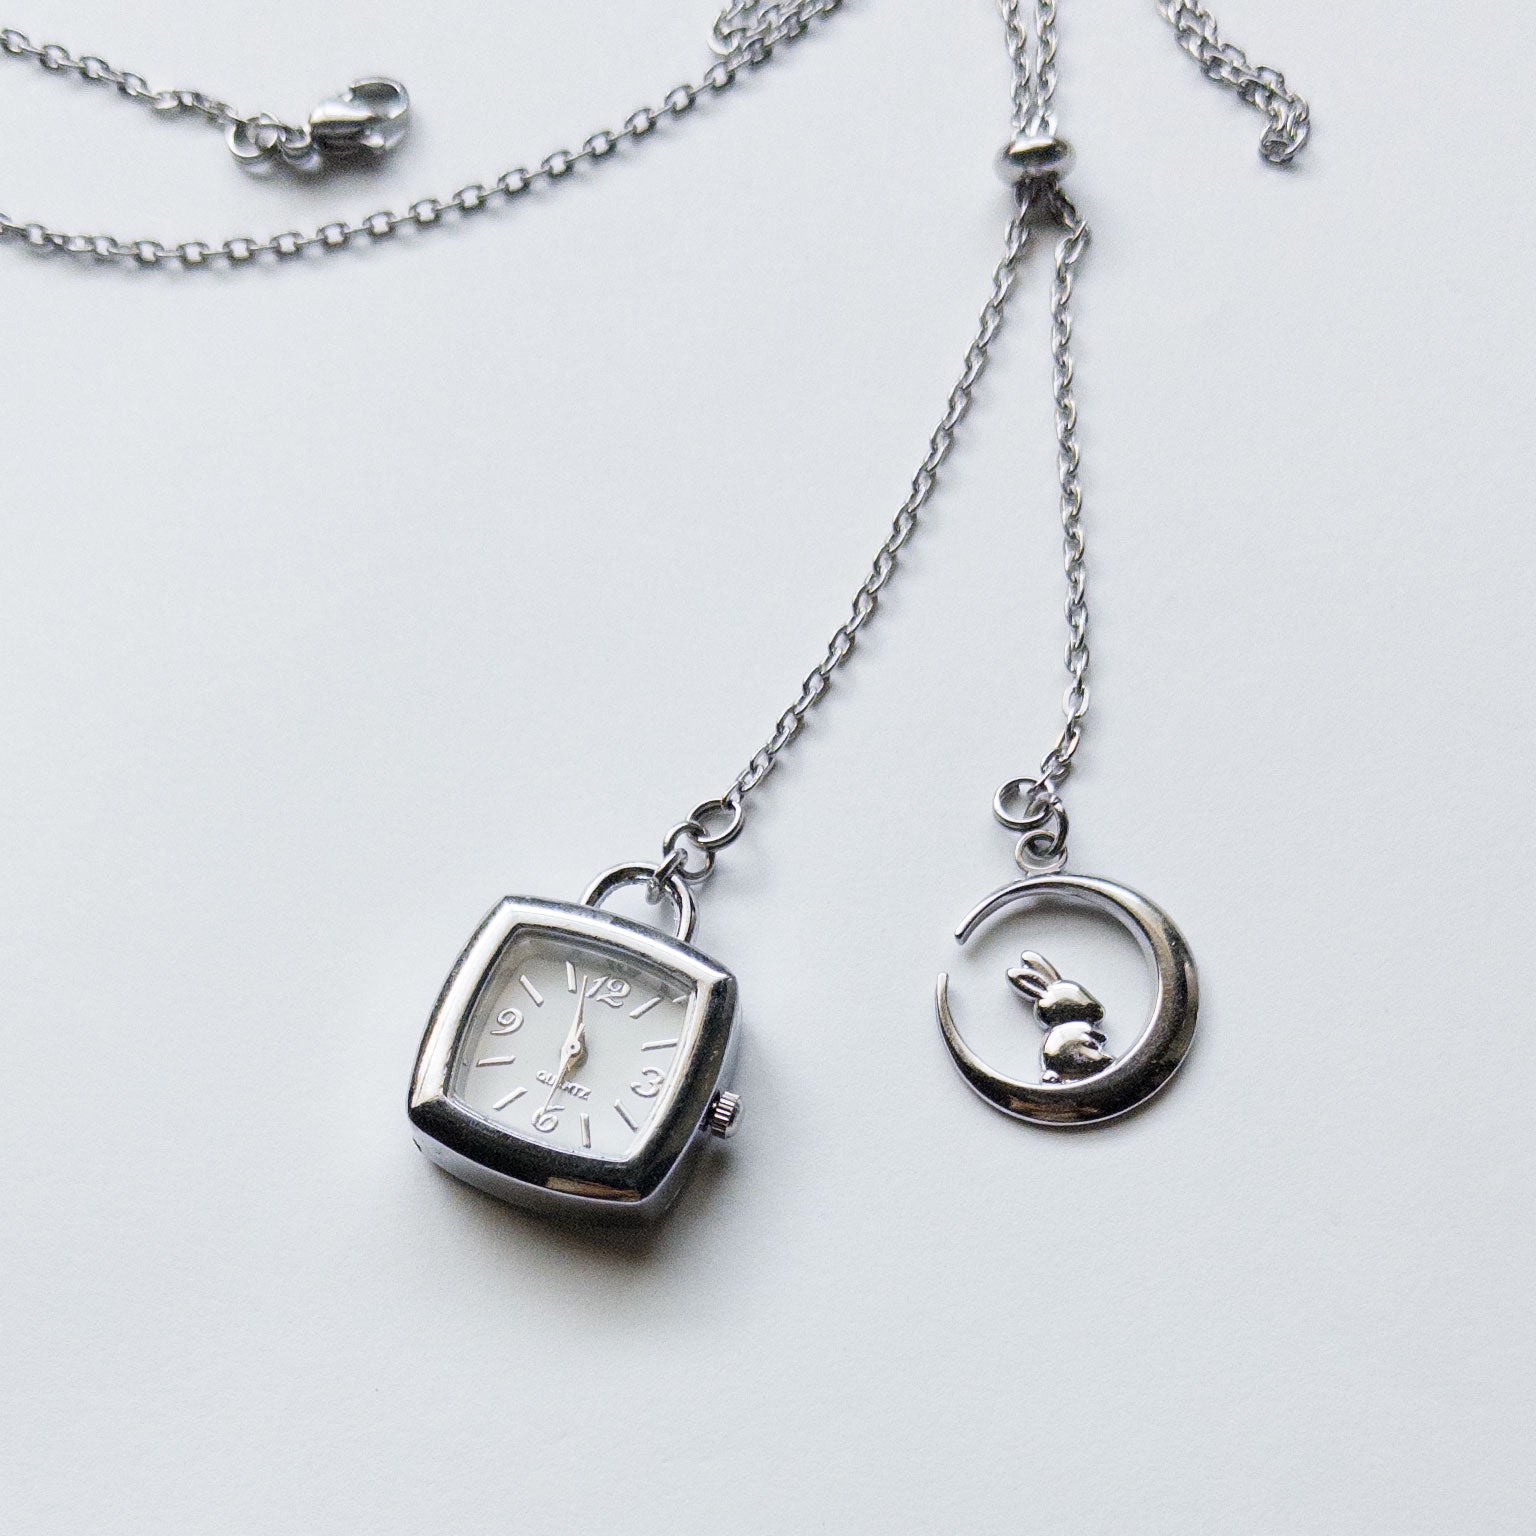 Adjustable sliding lariat watch necklace stainless steel